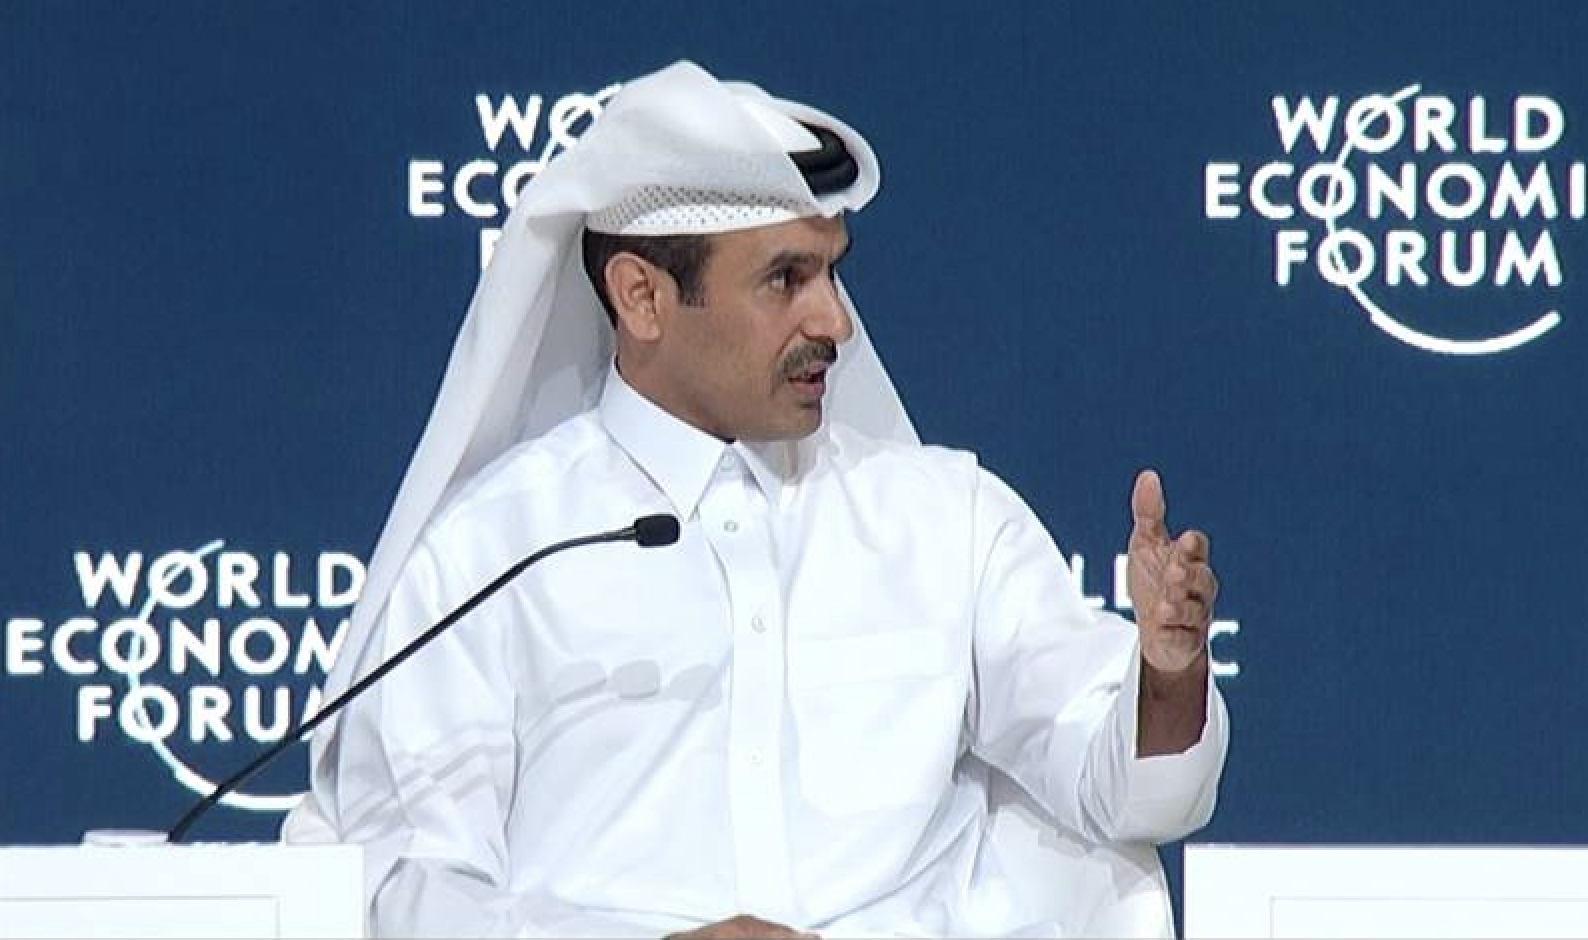 Is Qatar going green, or just talking about it?